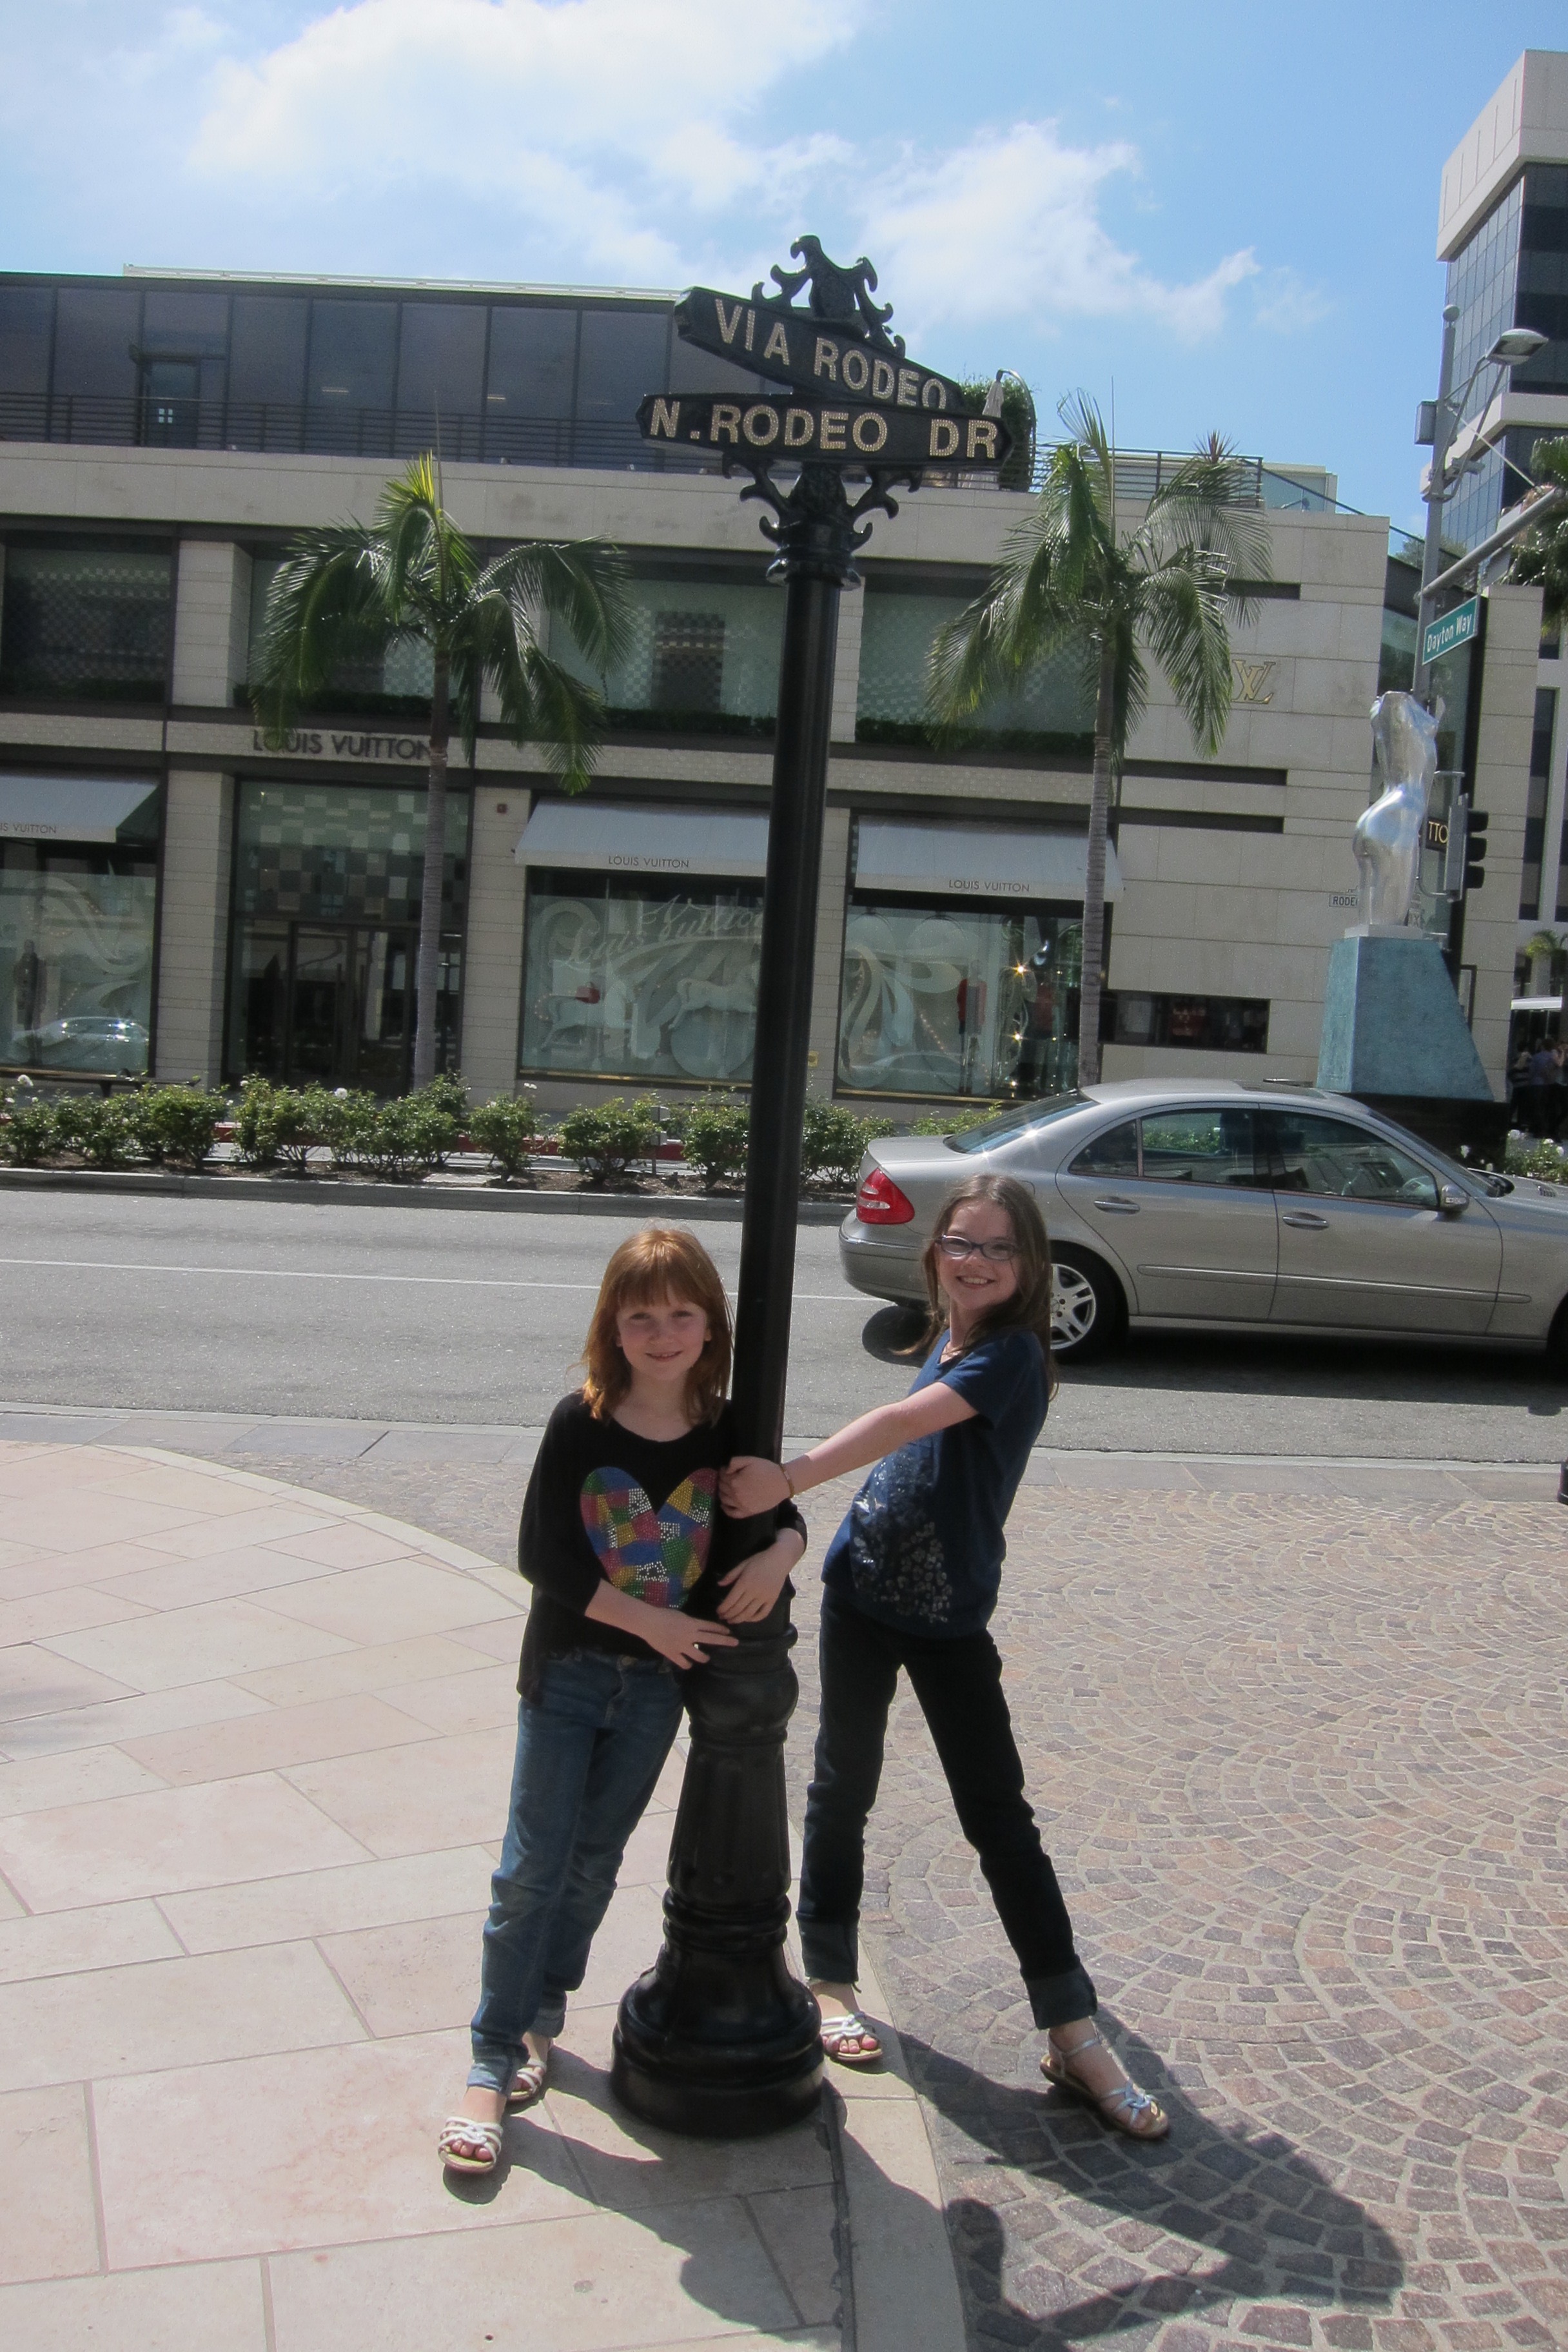 The famous Rodeo drive sign in LA